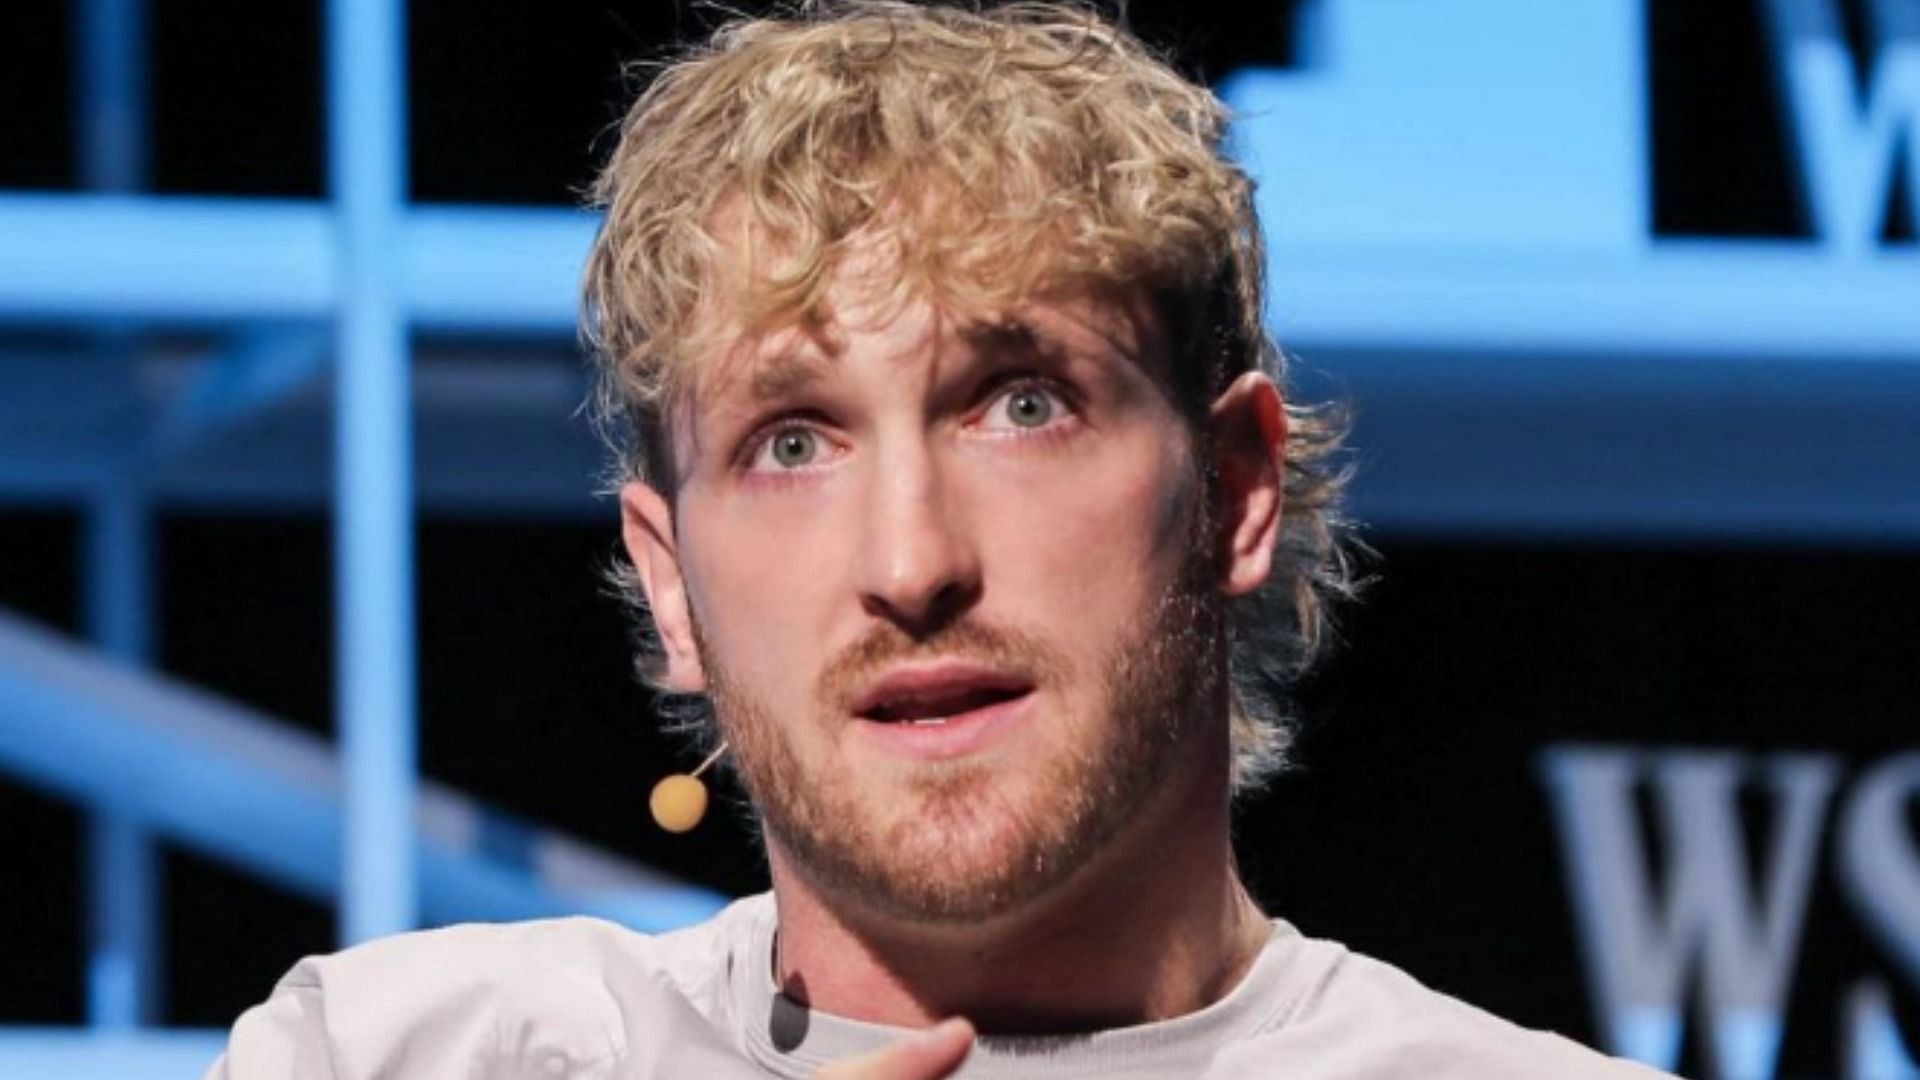 Logan Paul is Over Party trends on Twitter as YouTuber comments on Zayn Malik (Image via loganpaul/Instagram)